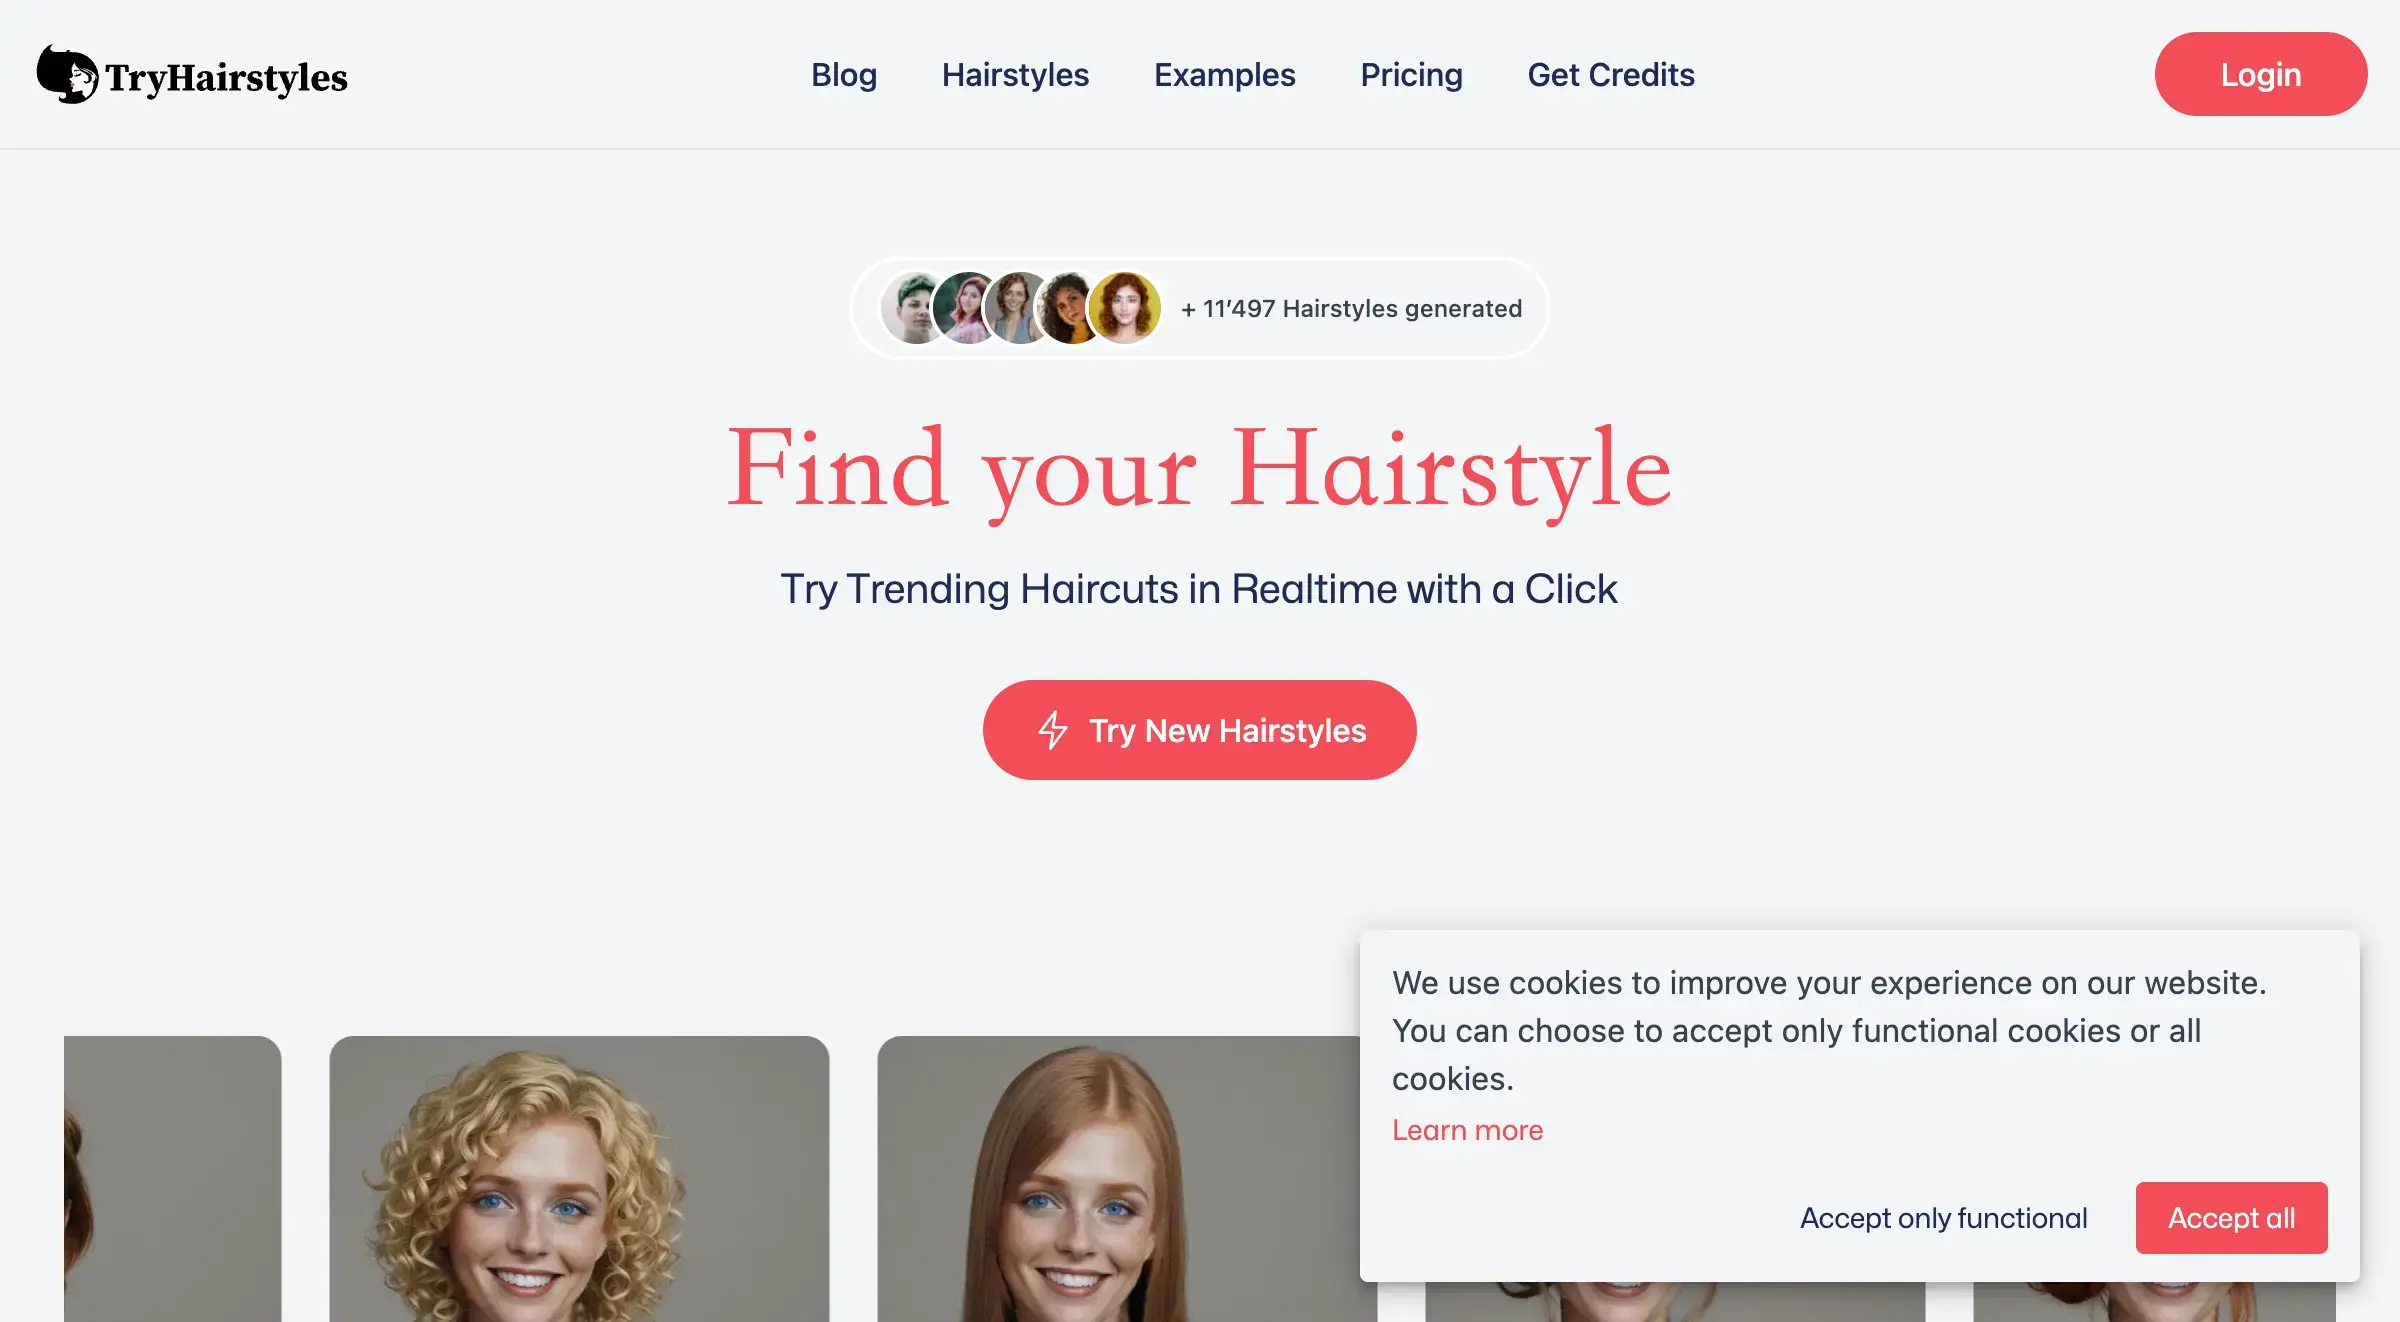 TryHairstyles: Find Your Hairstyle